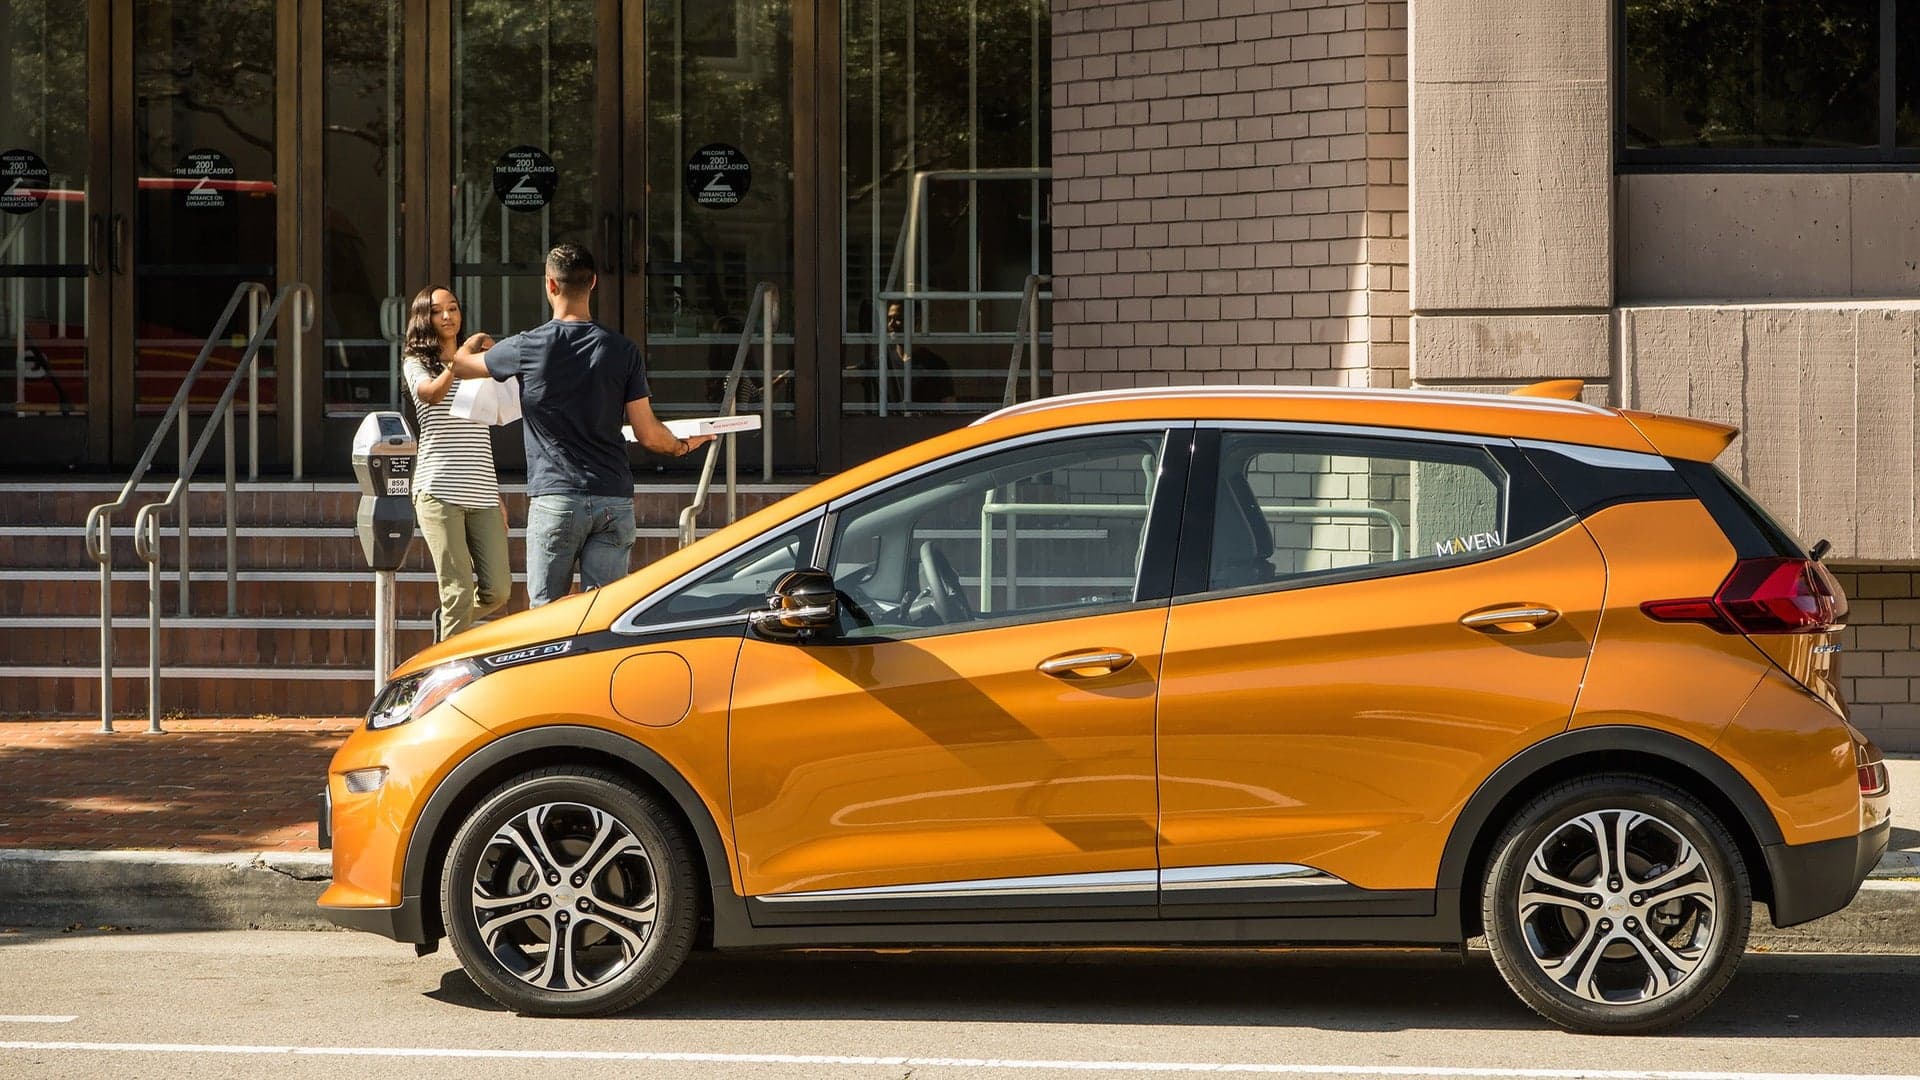 GM’s Maven Adds New Chevy Bolt Car Sharing Service for the ‘Gig Economy’